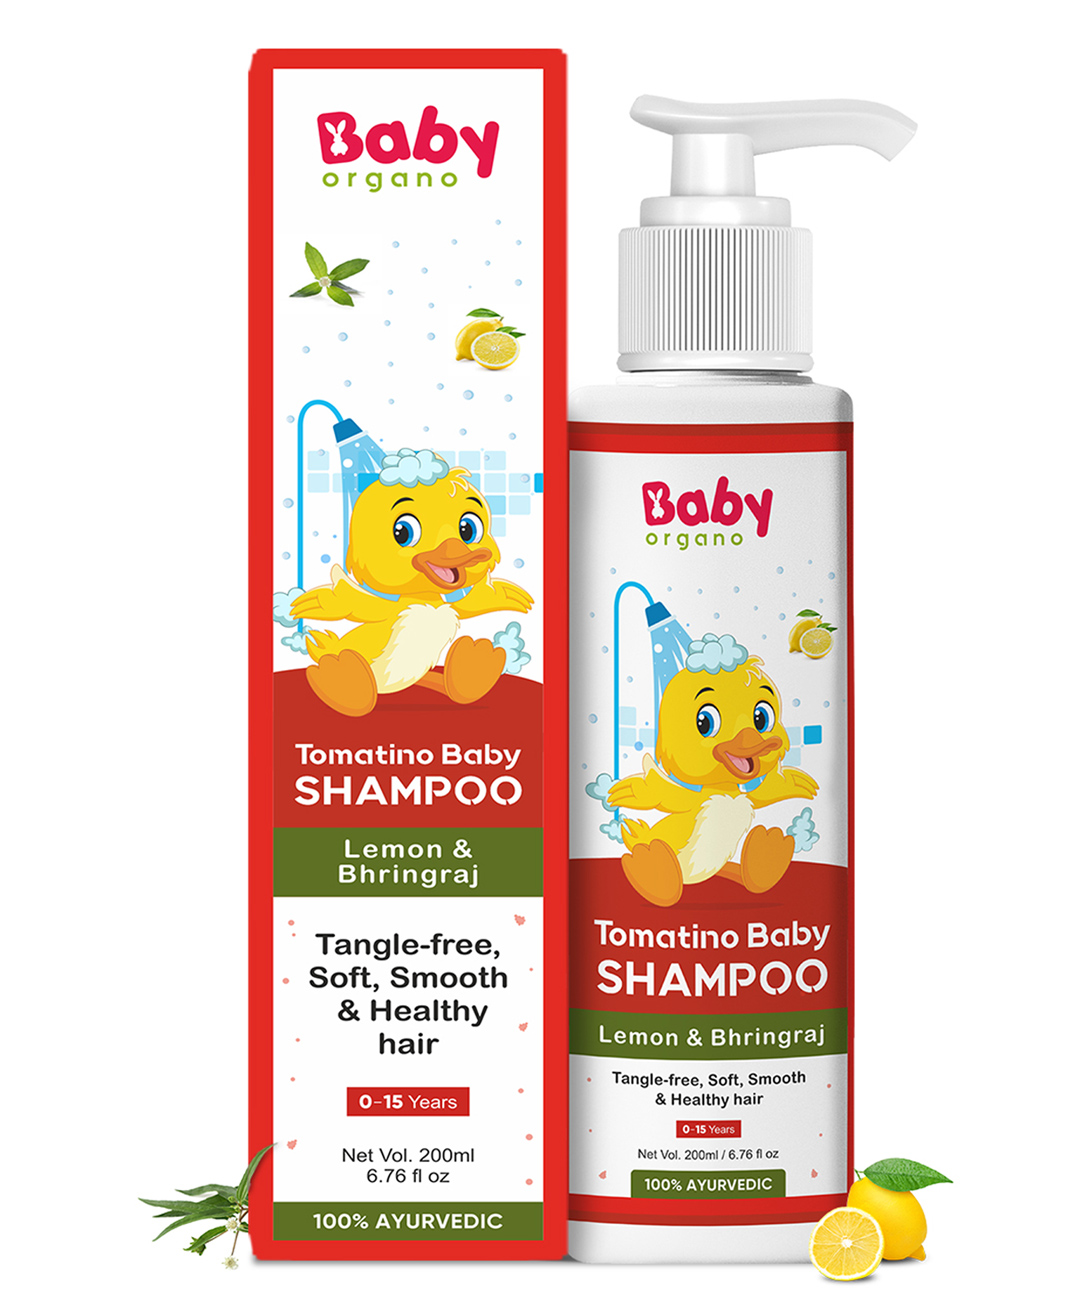 BabyOrgano Baby Shampoo for Smooth & Silky Hair with Lemon & Bhringraj  Goodness- 200 ml Online in India, Buy at Best Price from  -  9491088